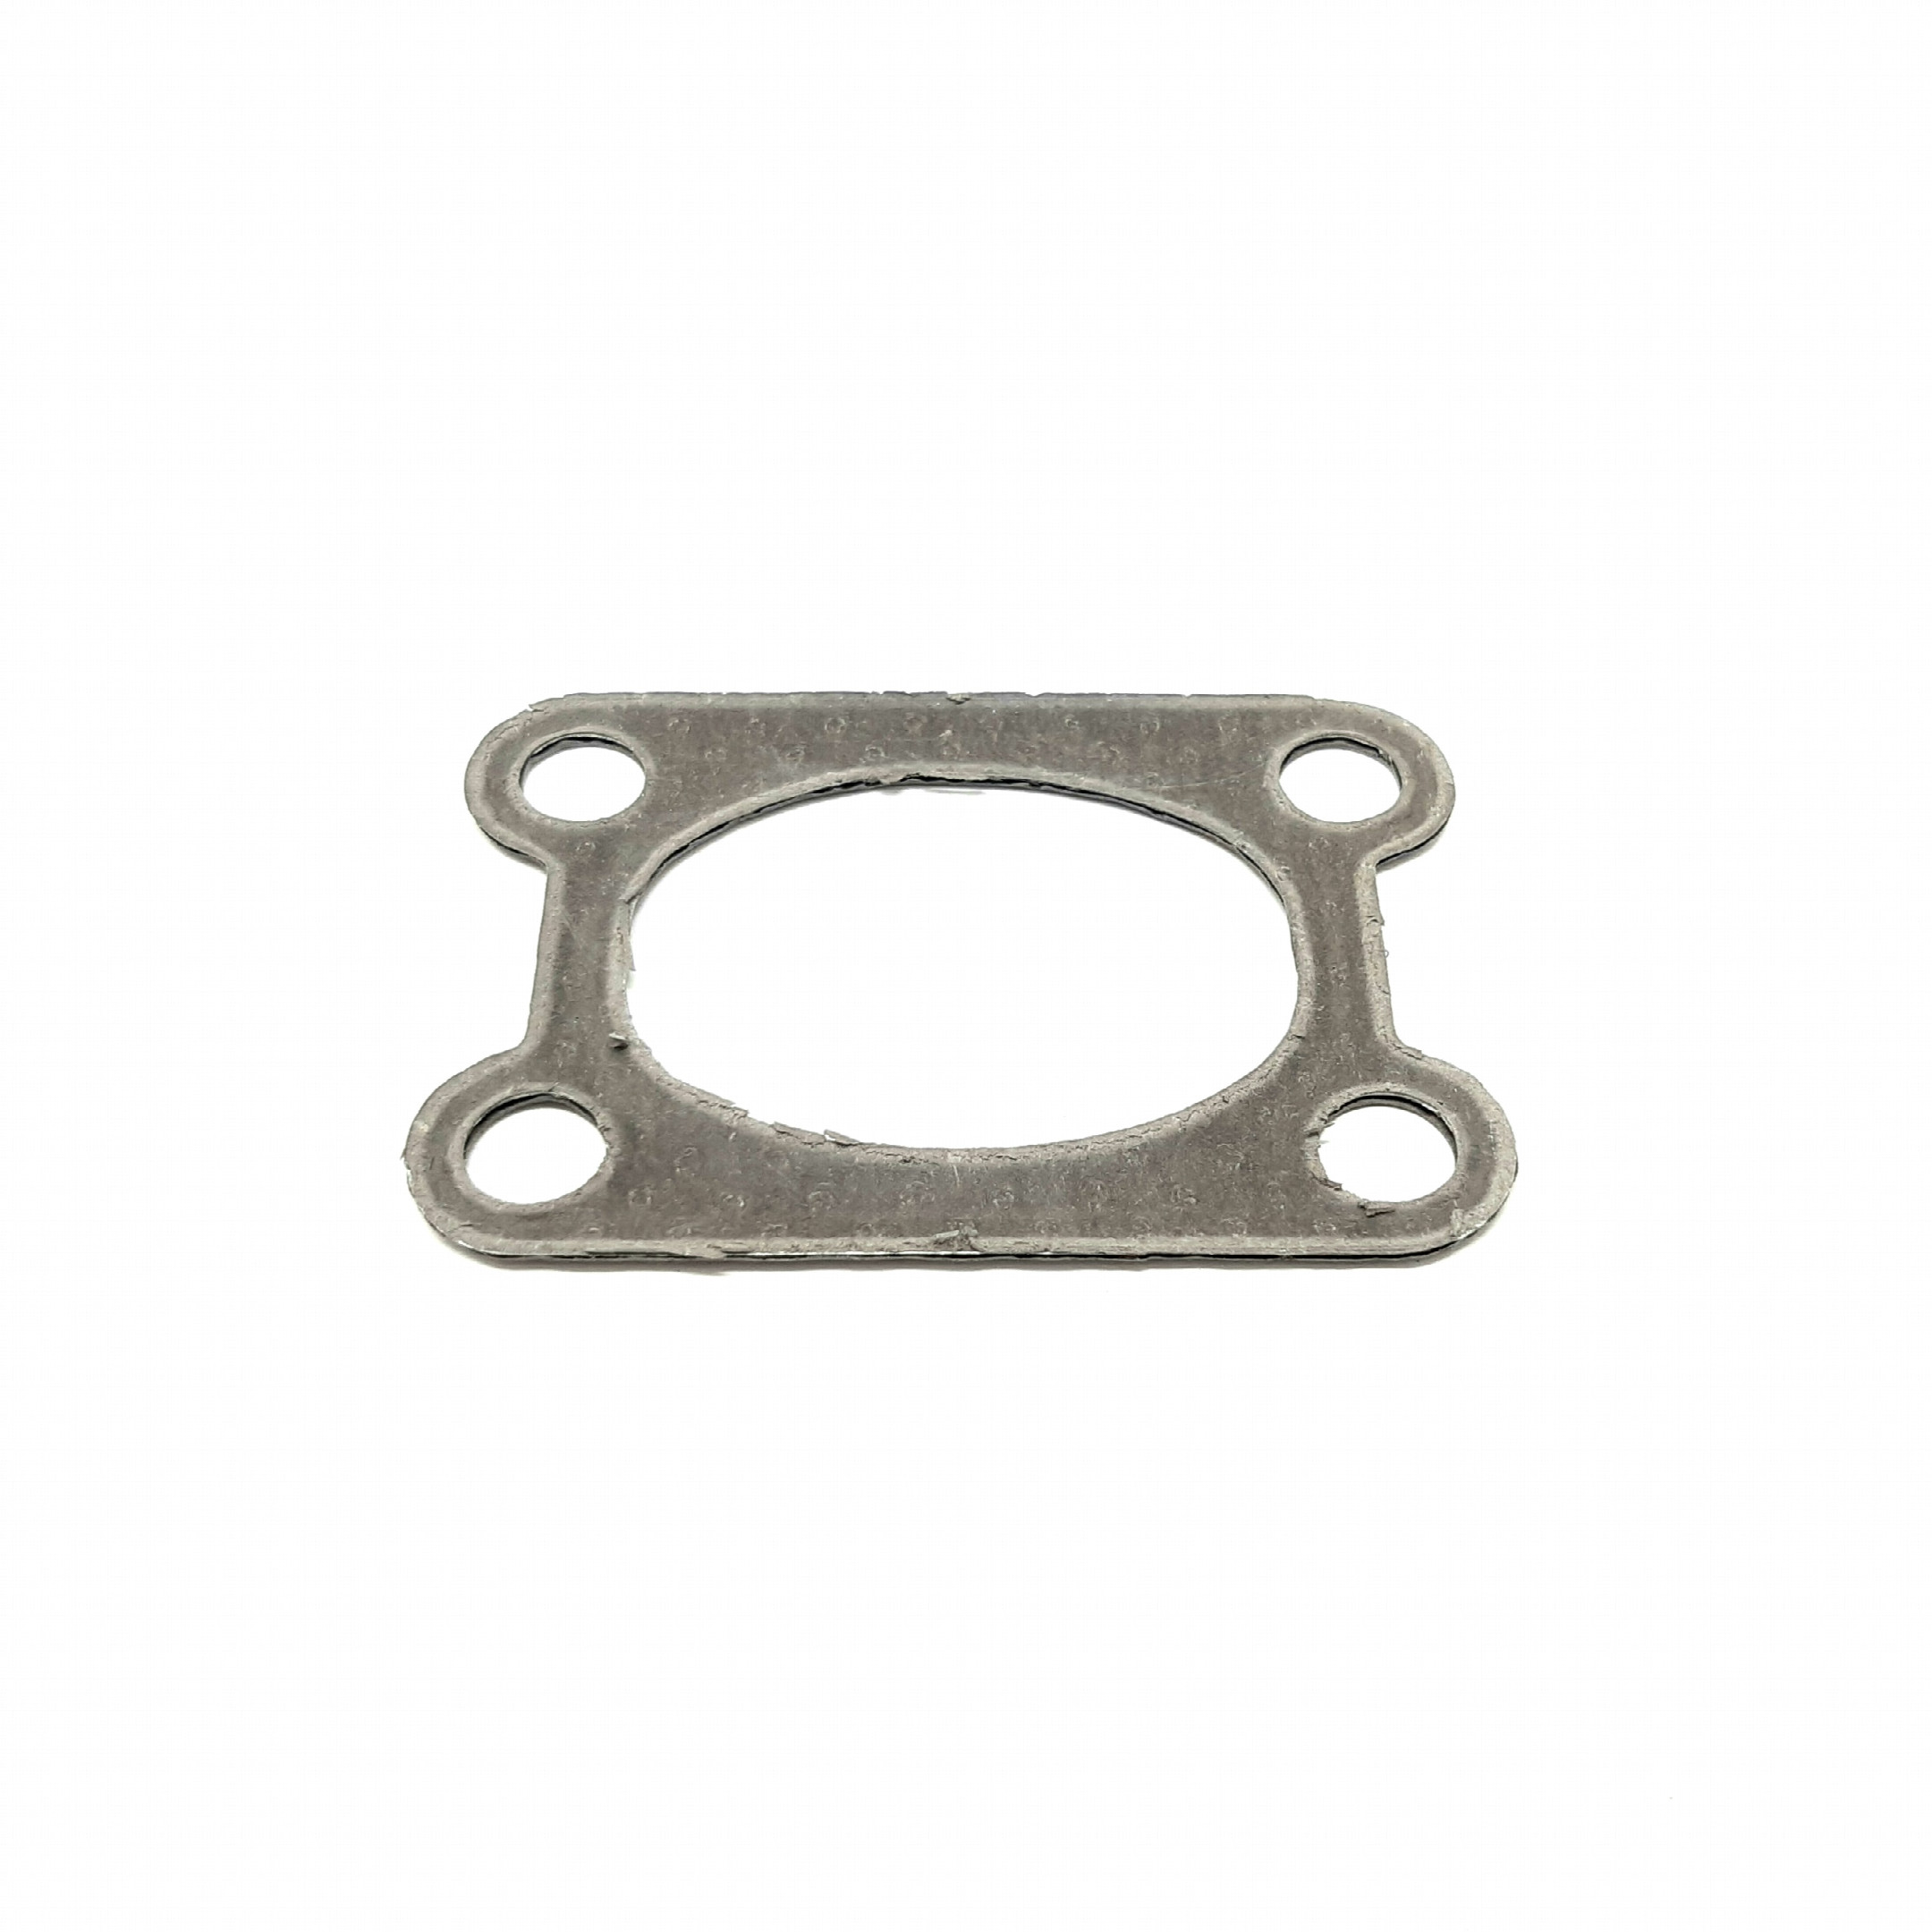 Exhaust Gasket for SOLO 2625